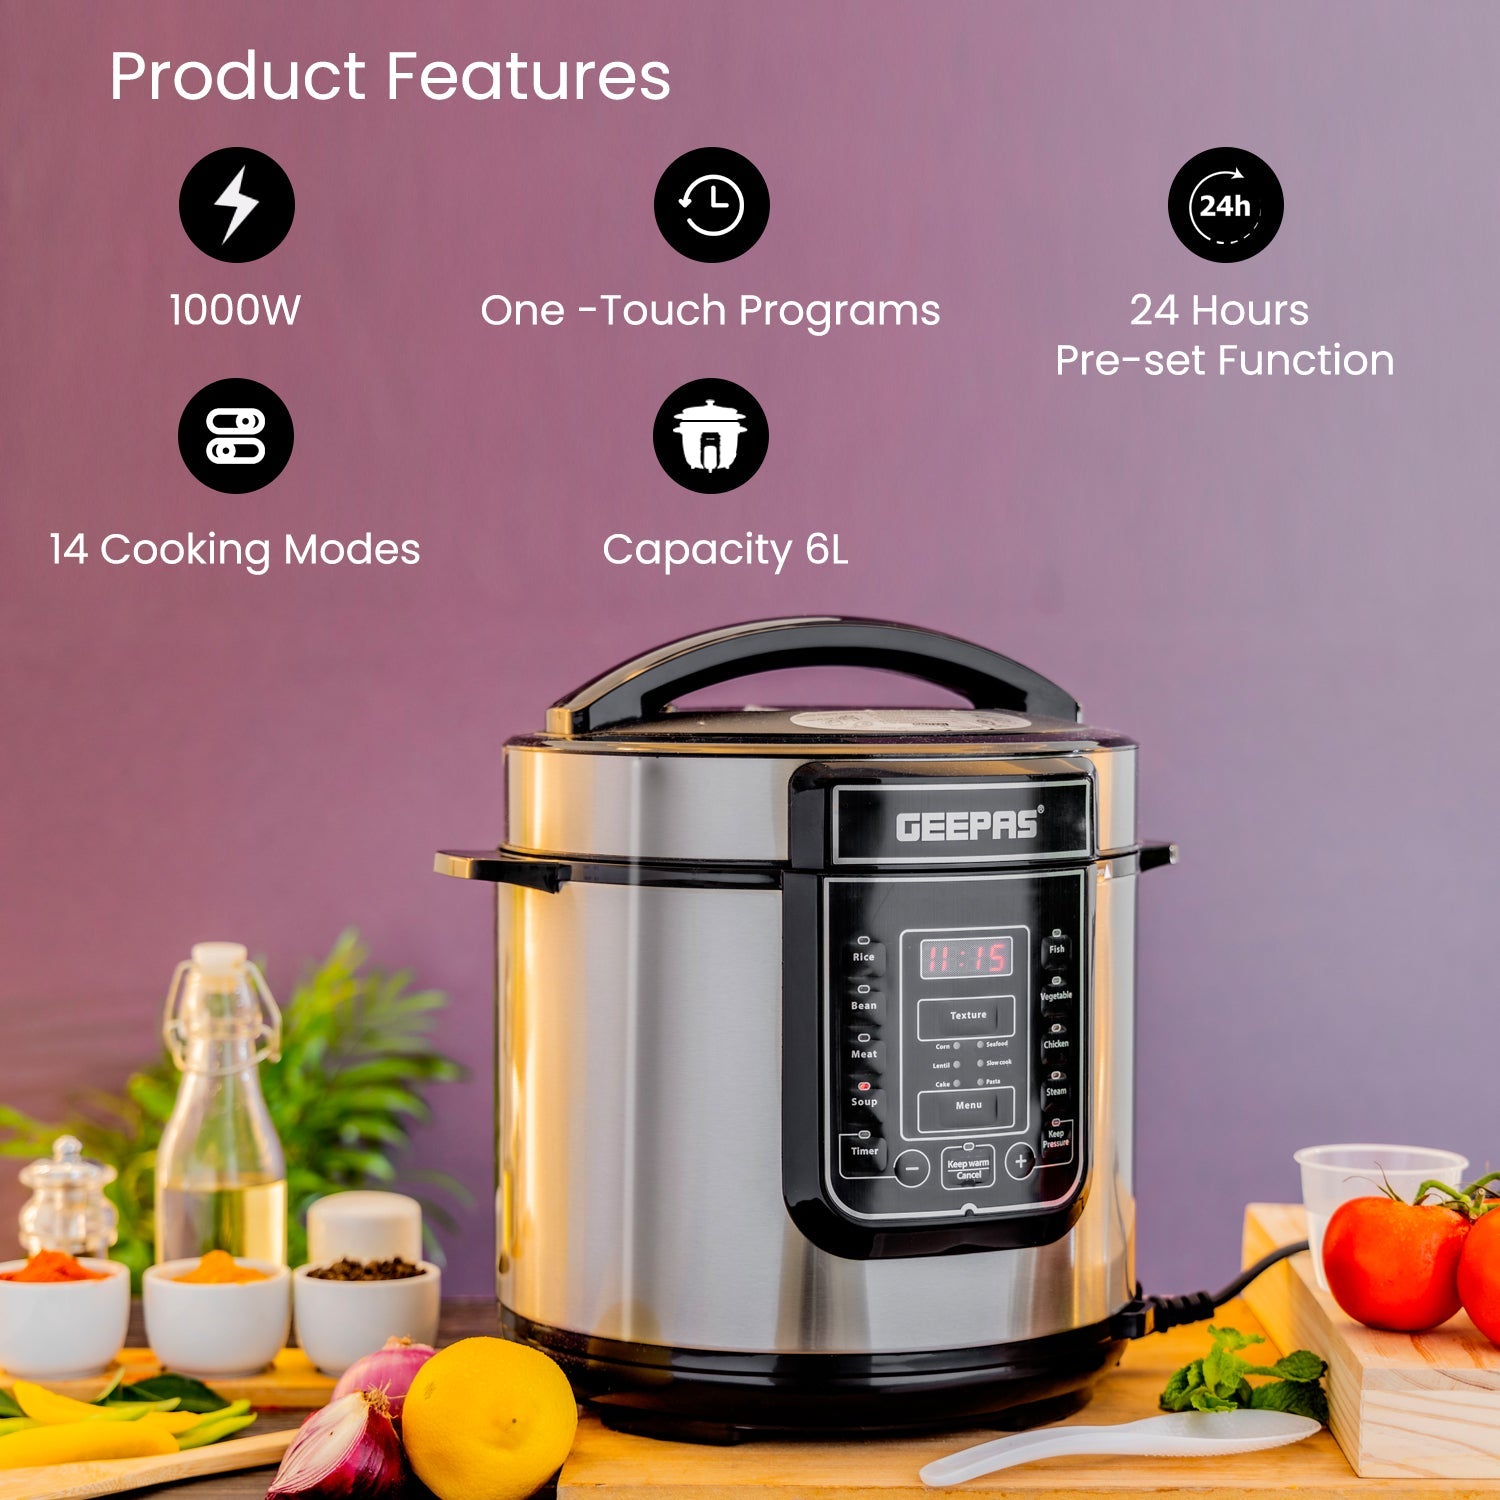 1000W Electric Multi Cooker Pressure Cooker, Steamer Multicooker Geepas | For you. For life. 